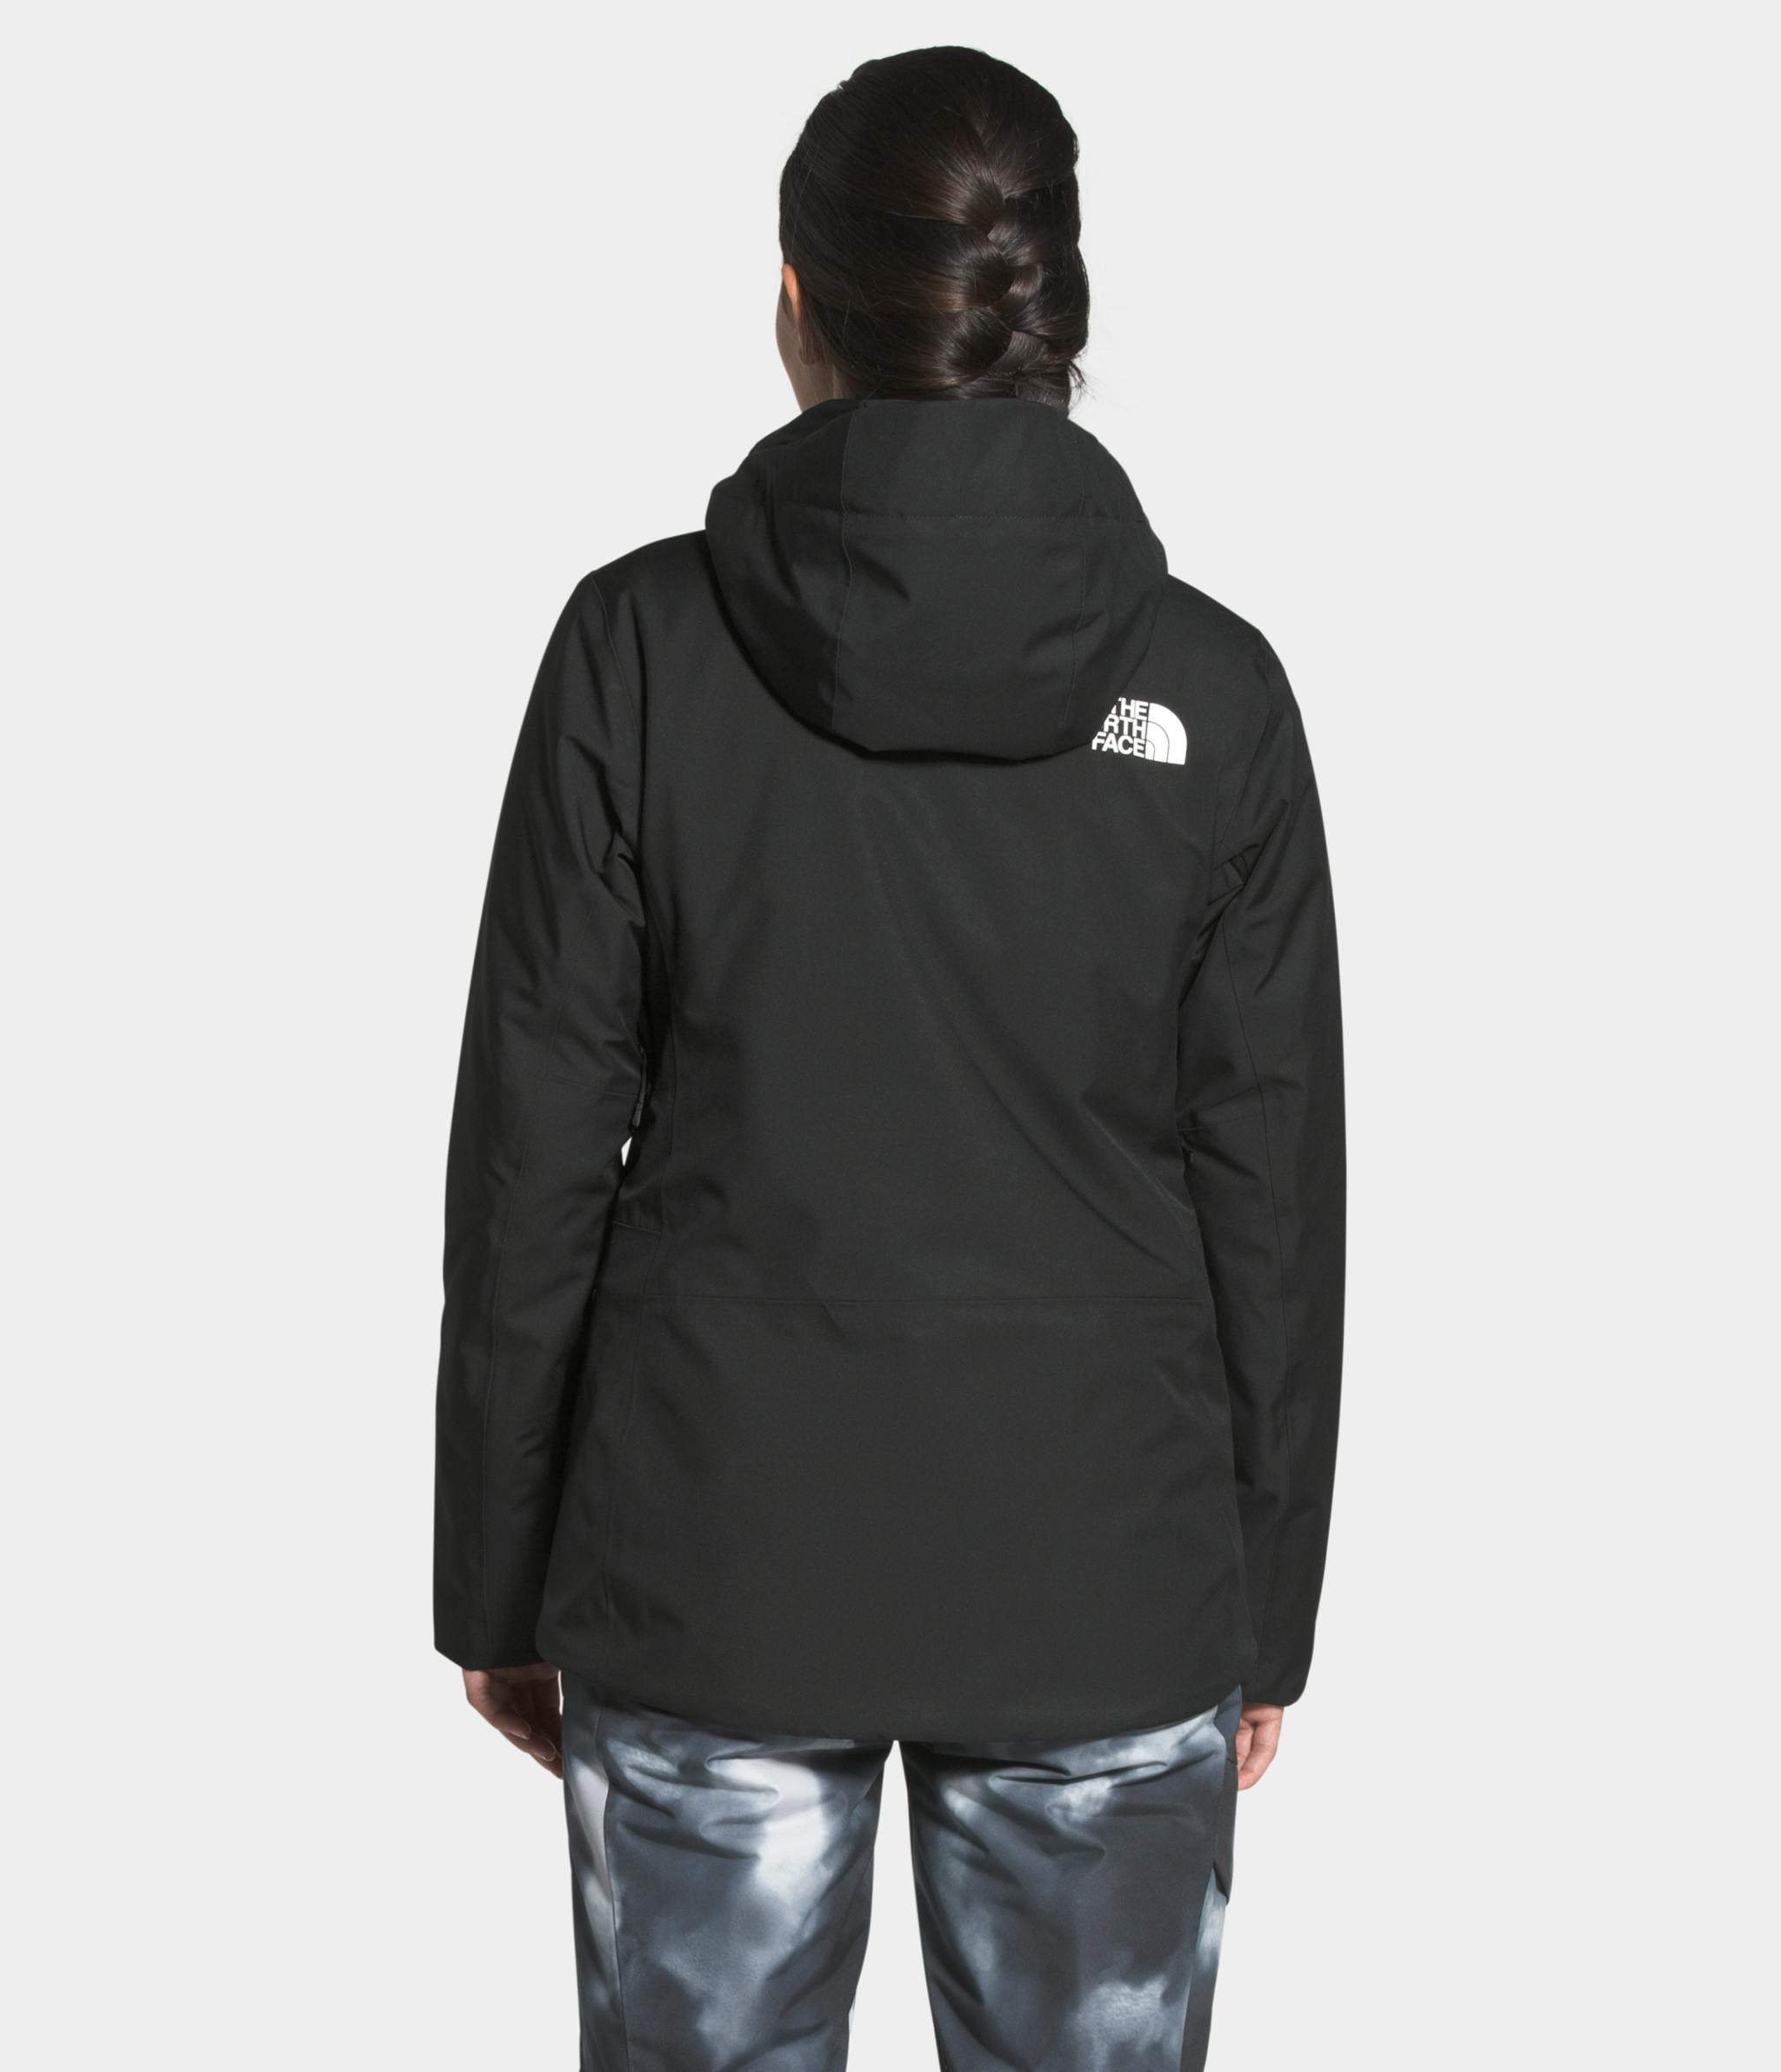 The North Face Women's Gatekeeper 2L Insulated Jacket